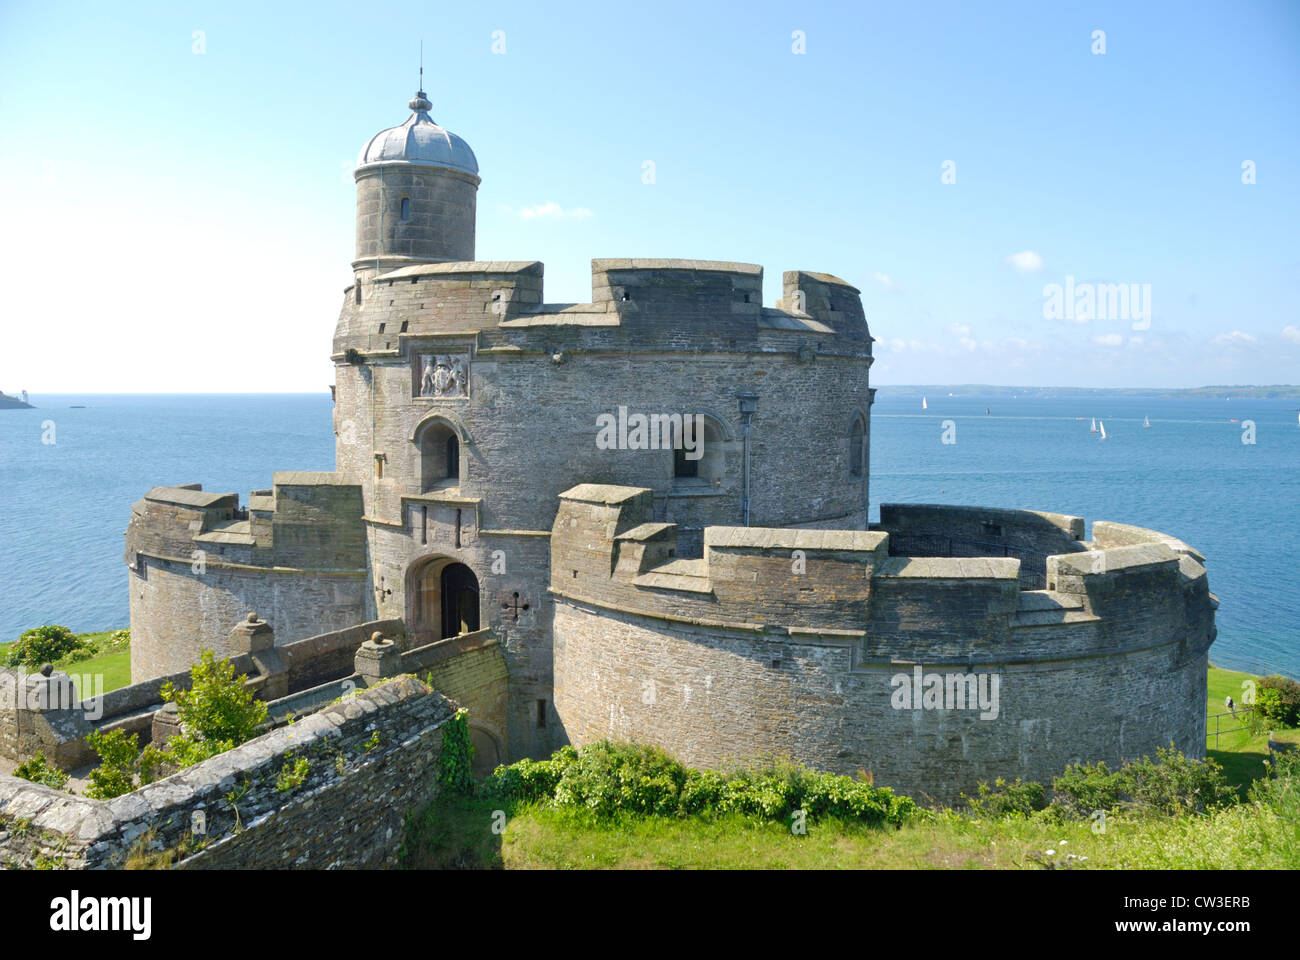 St. Mawes Castle, St. Mawes, Cornwall Stock Photo - Alamy